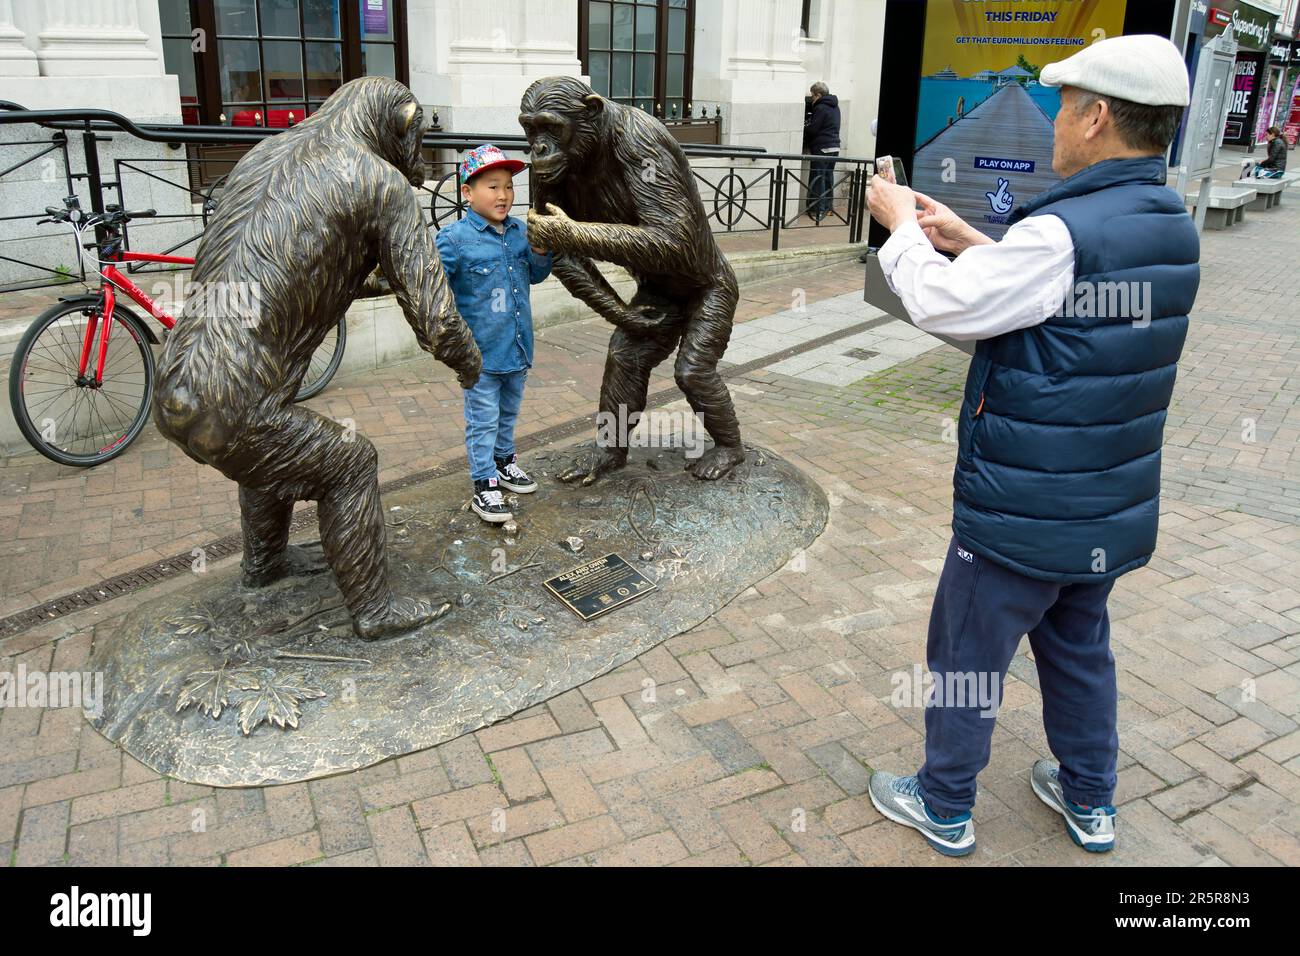 the bronze sculpture by gillie and marc, wild chimp conflict, encourages a family photo, in kingston upon thames, surrey, england Stock Photo